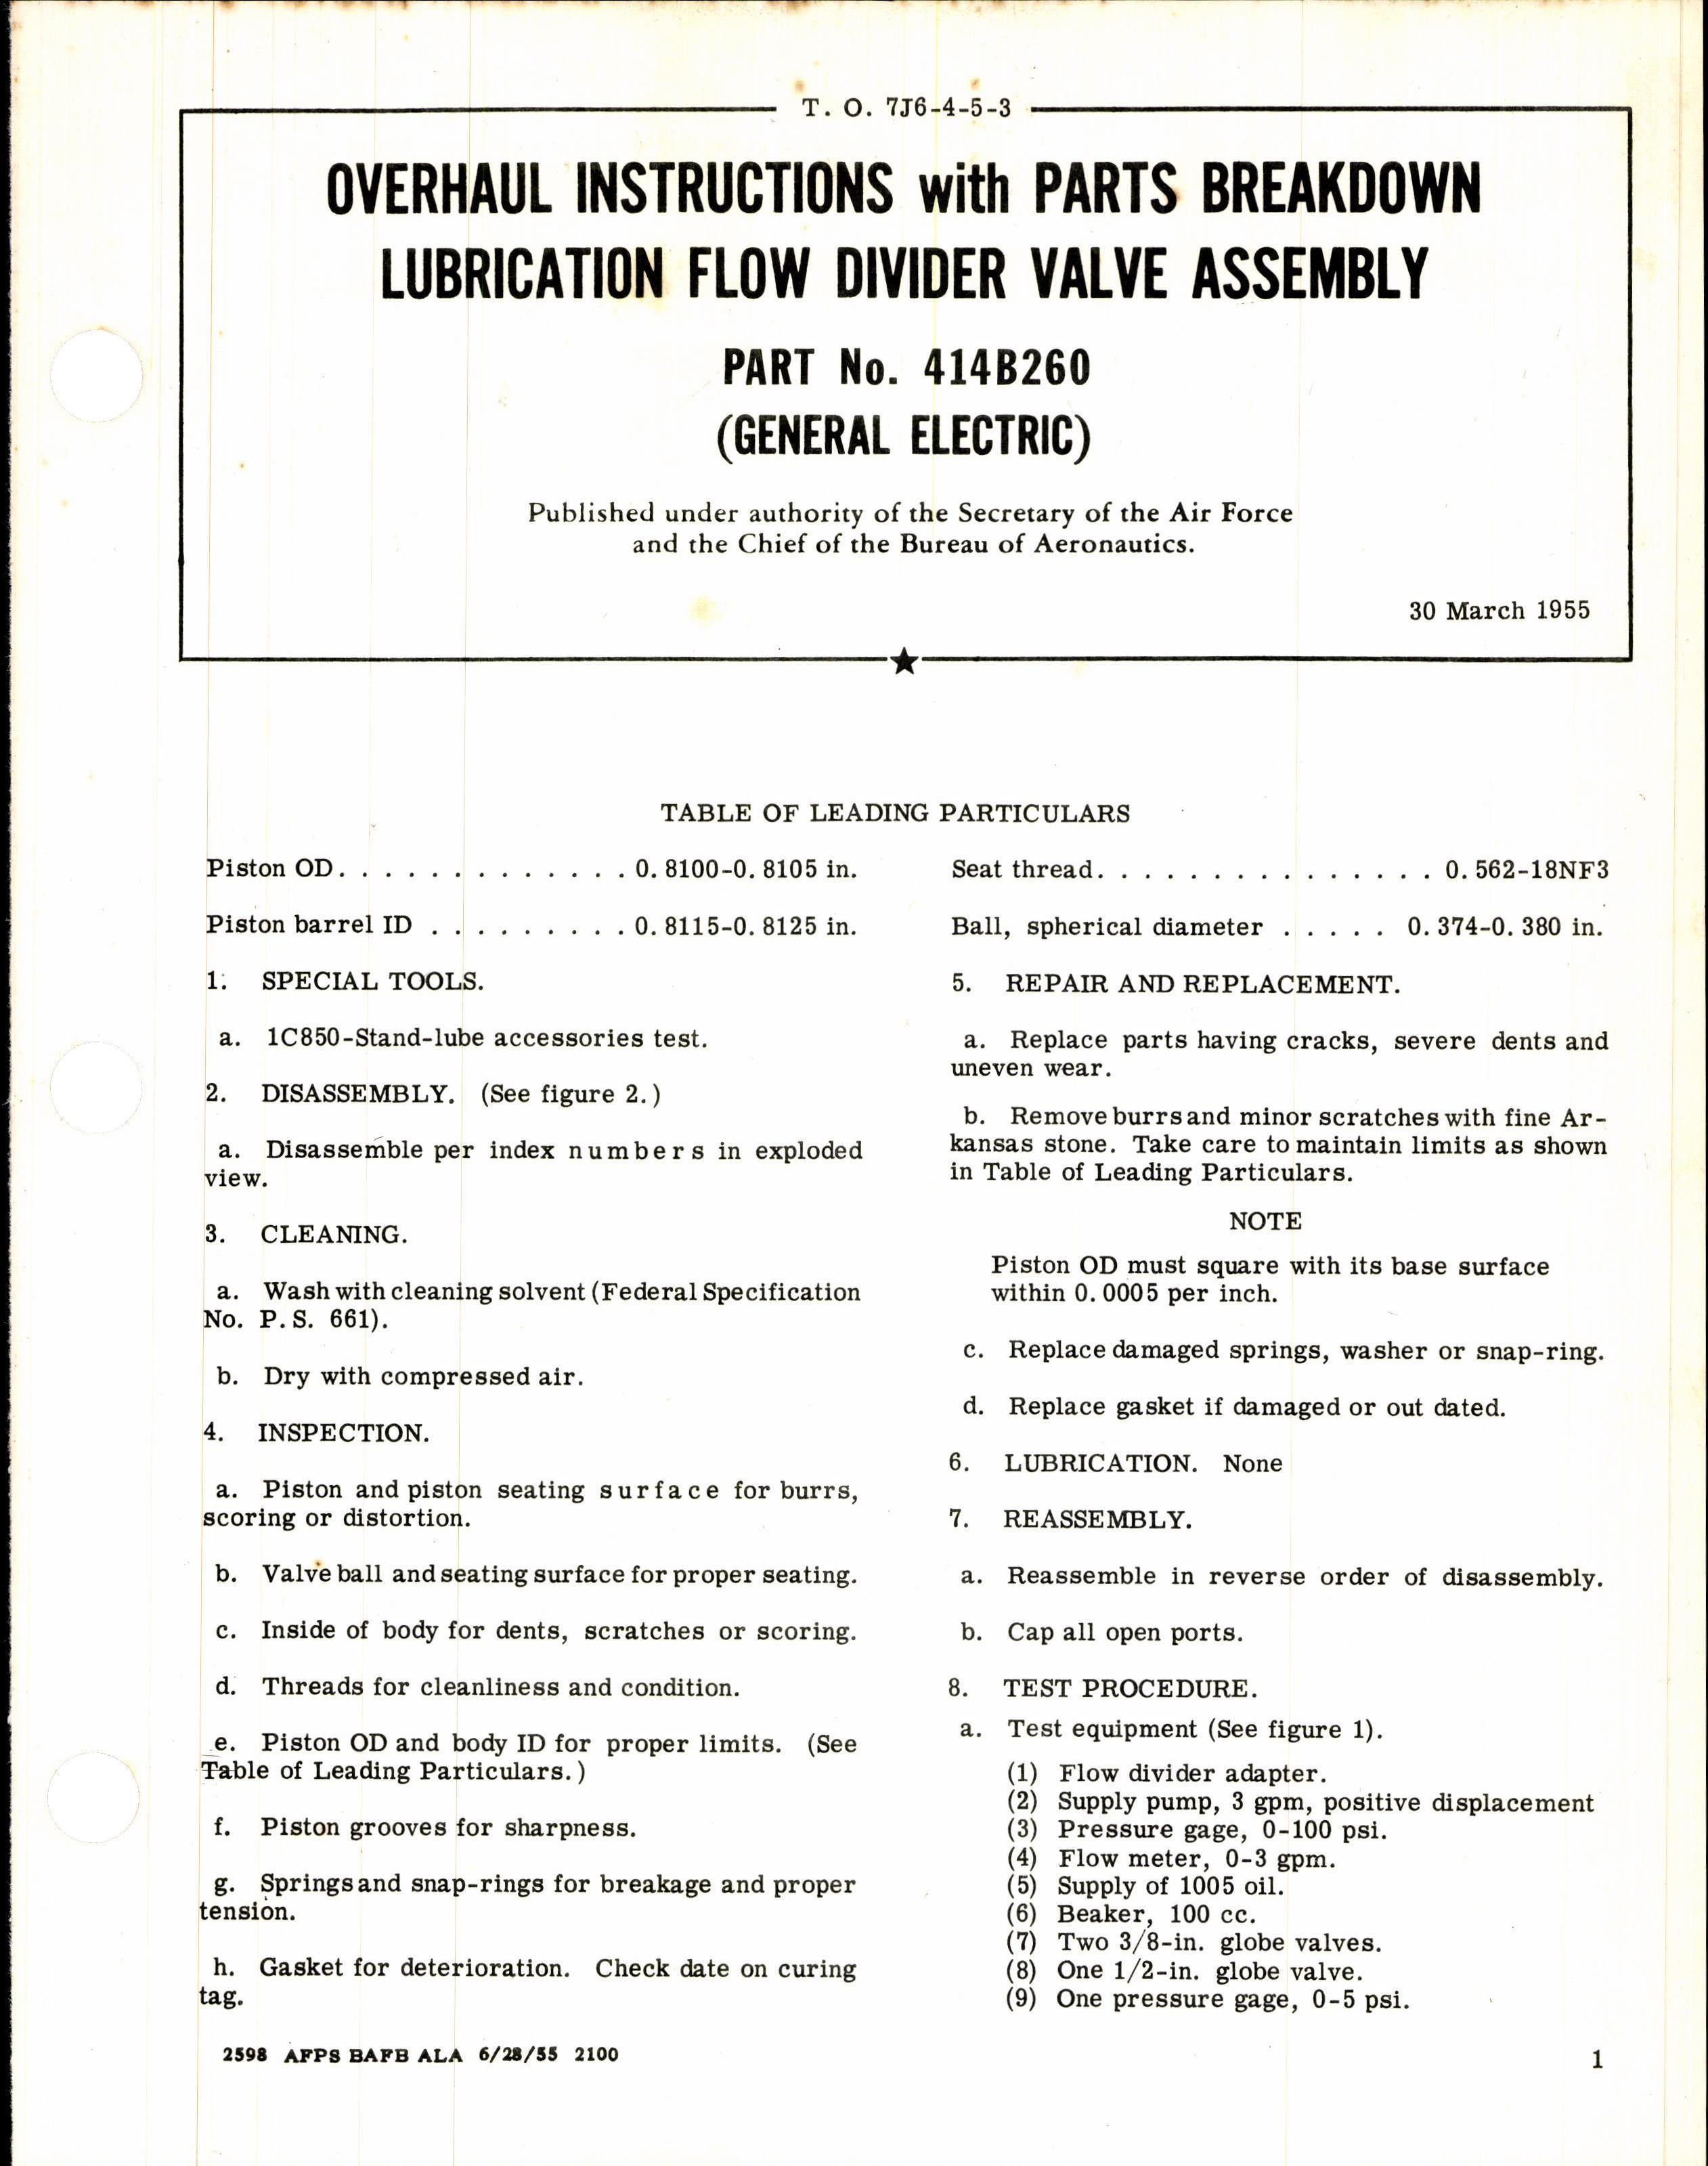 Sample page 1 from AirCorps Library document: Overhaul Instructions with Parts Breakdown Lubrication Flow Divider Valve Assembly